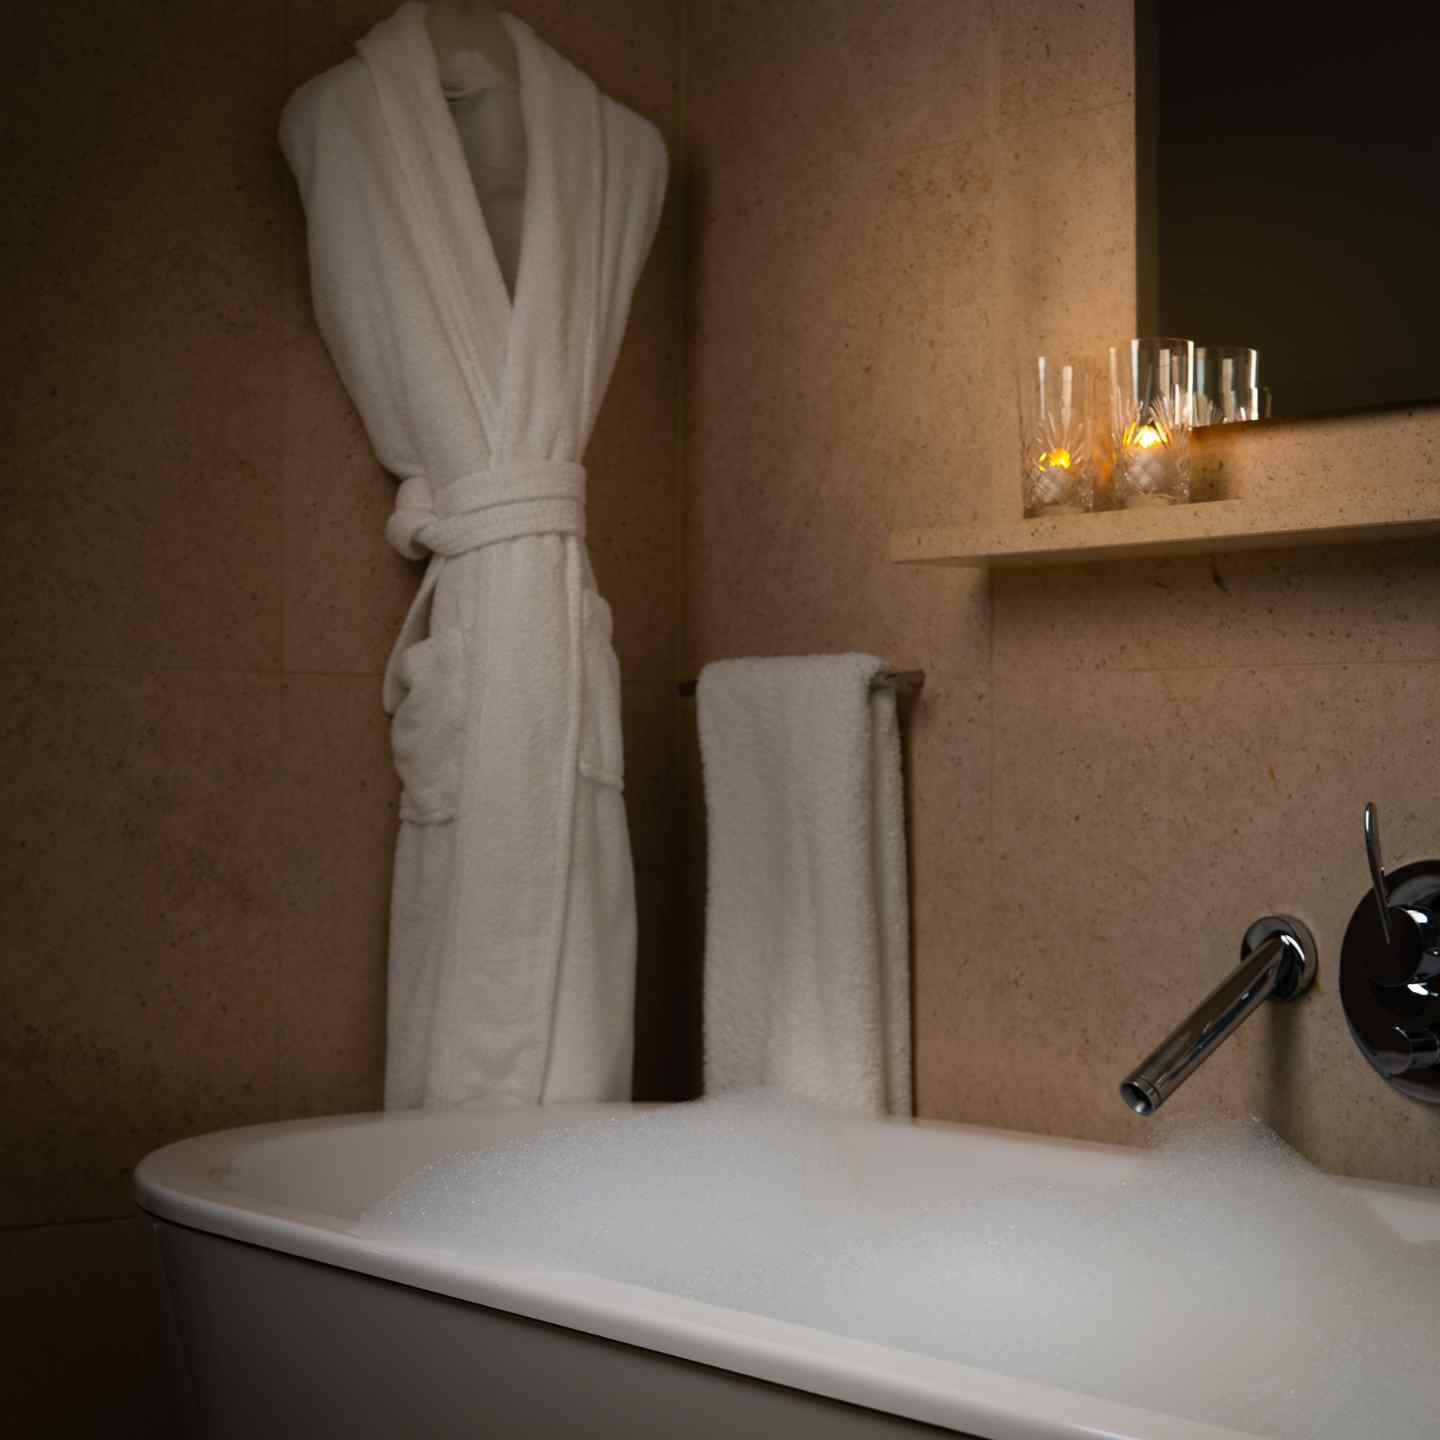 Free standing bathtub, robe, towel, and candles in St Martins Lane bathroom